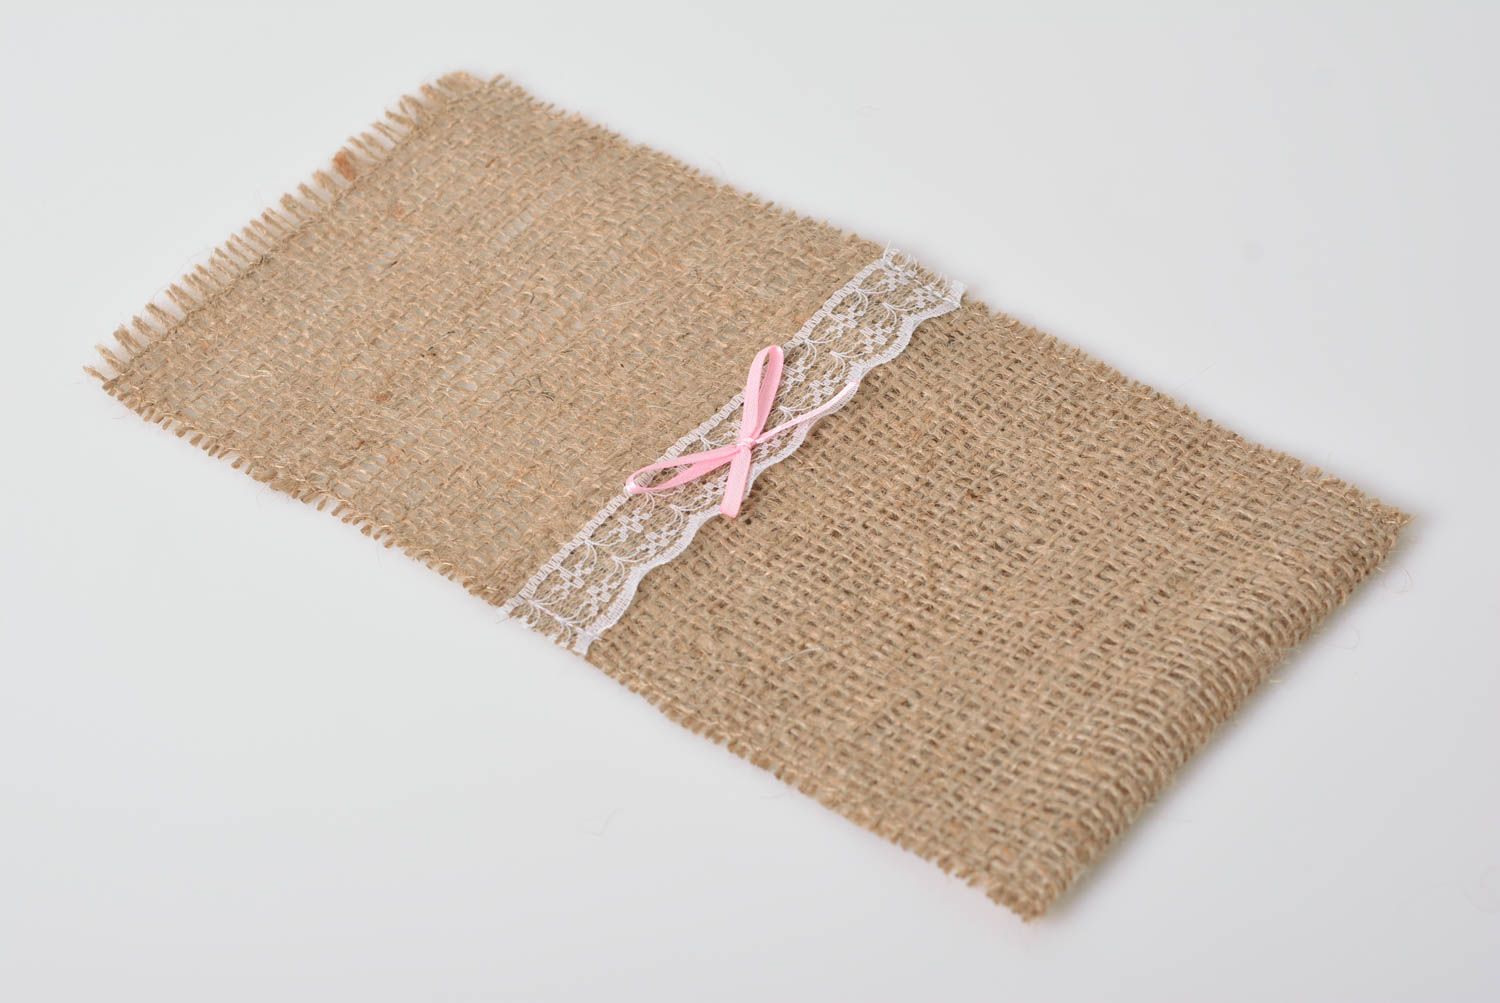 Case for cutlery made of burlap with ribbon beautiful handmade kitchen decor photo 3